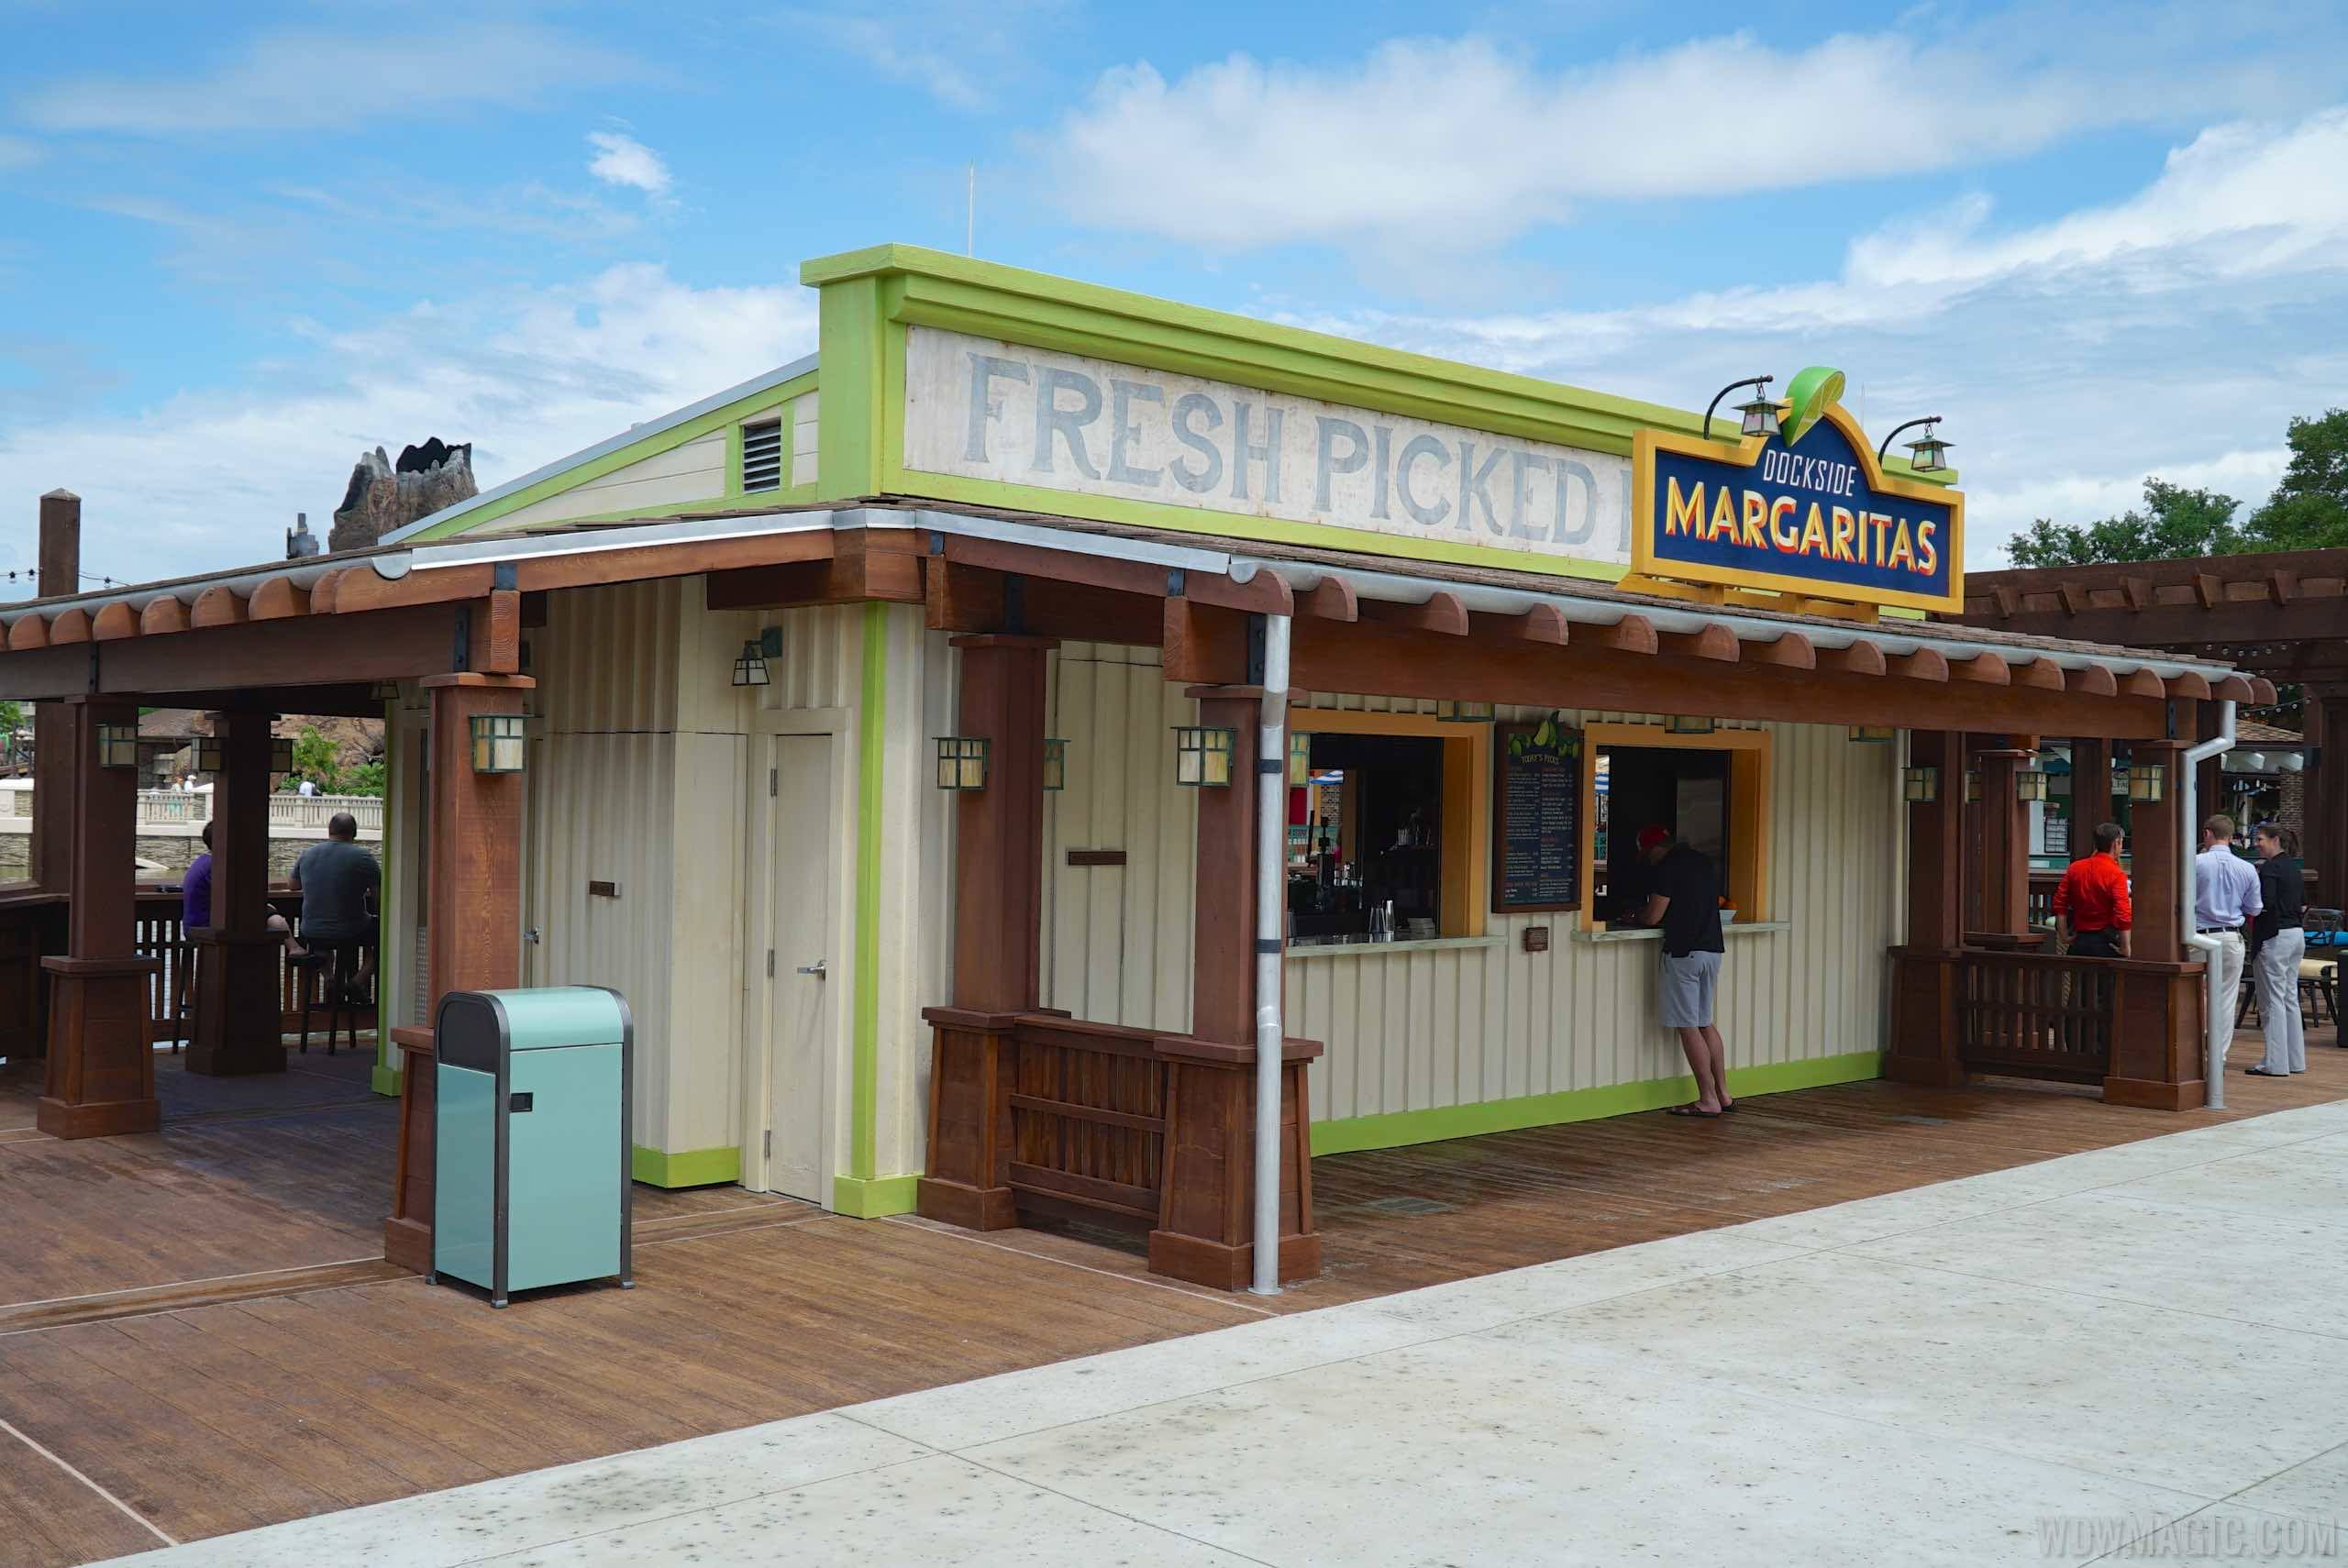 Dockside Margaritas as Disney Springs to feature classic Pleasure Island drinks throughout the summer